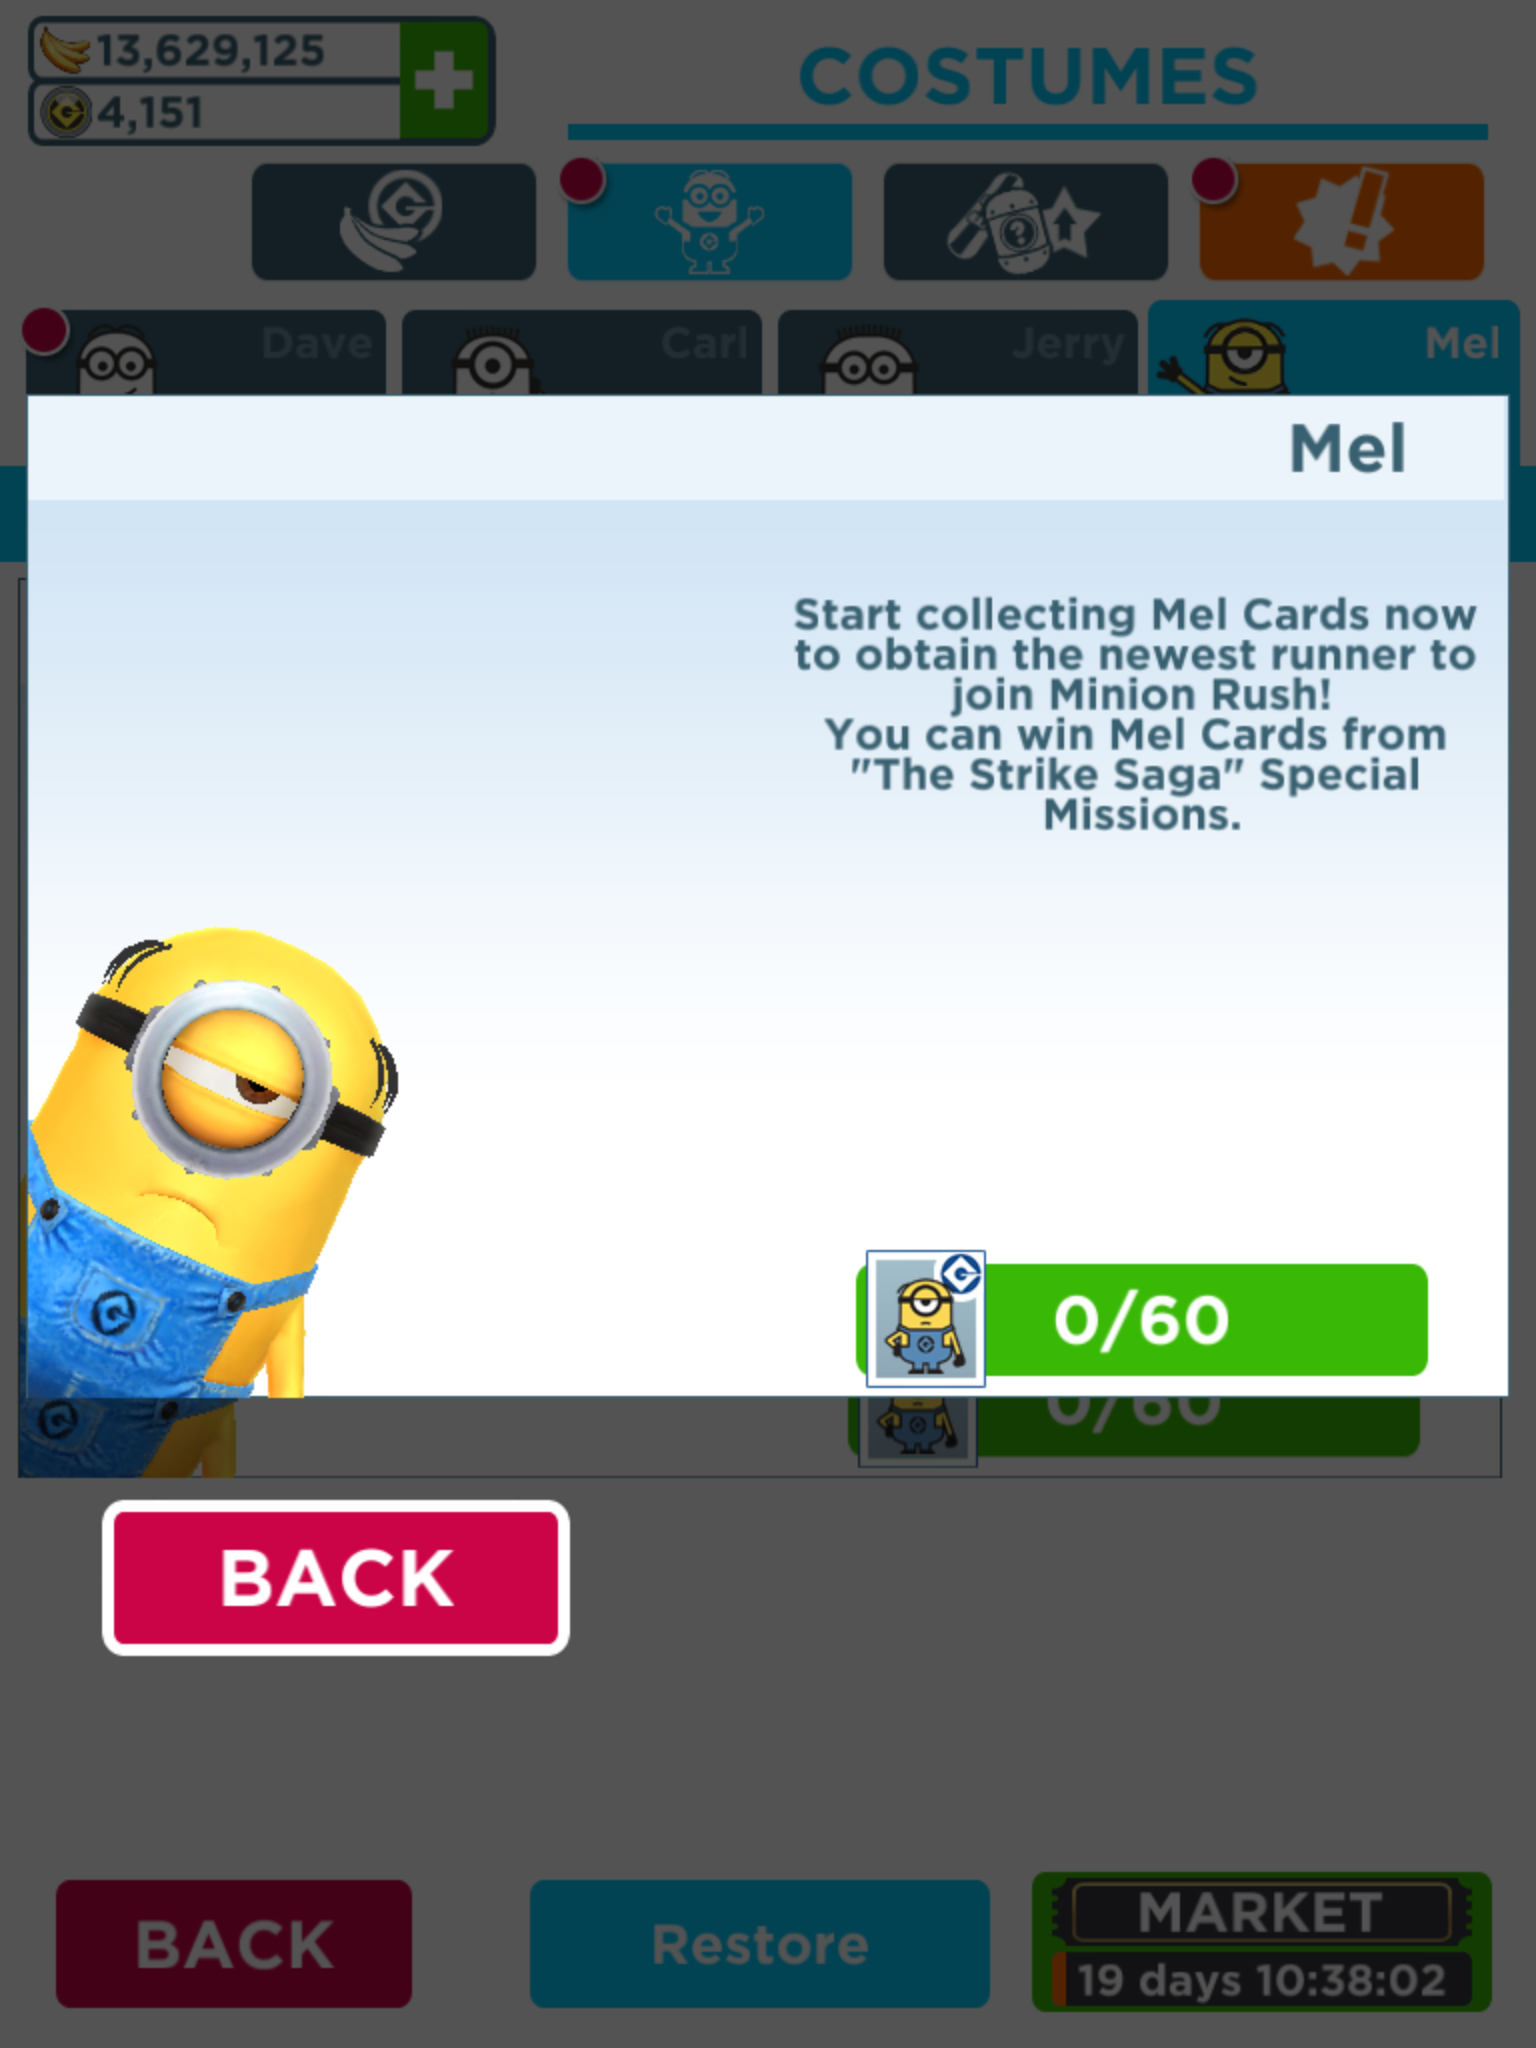 Mel Cards (Minion Rush) | Despicable Me Wiki | FANDOM powered by Wikia